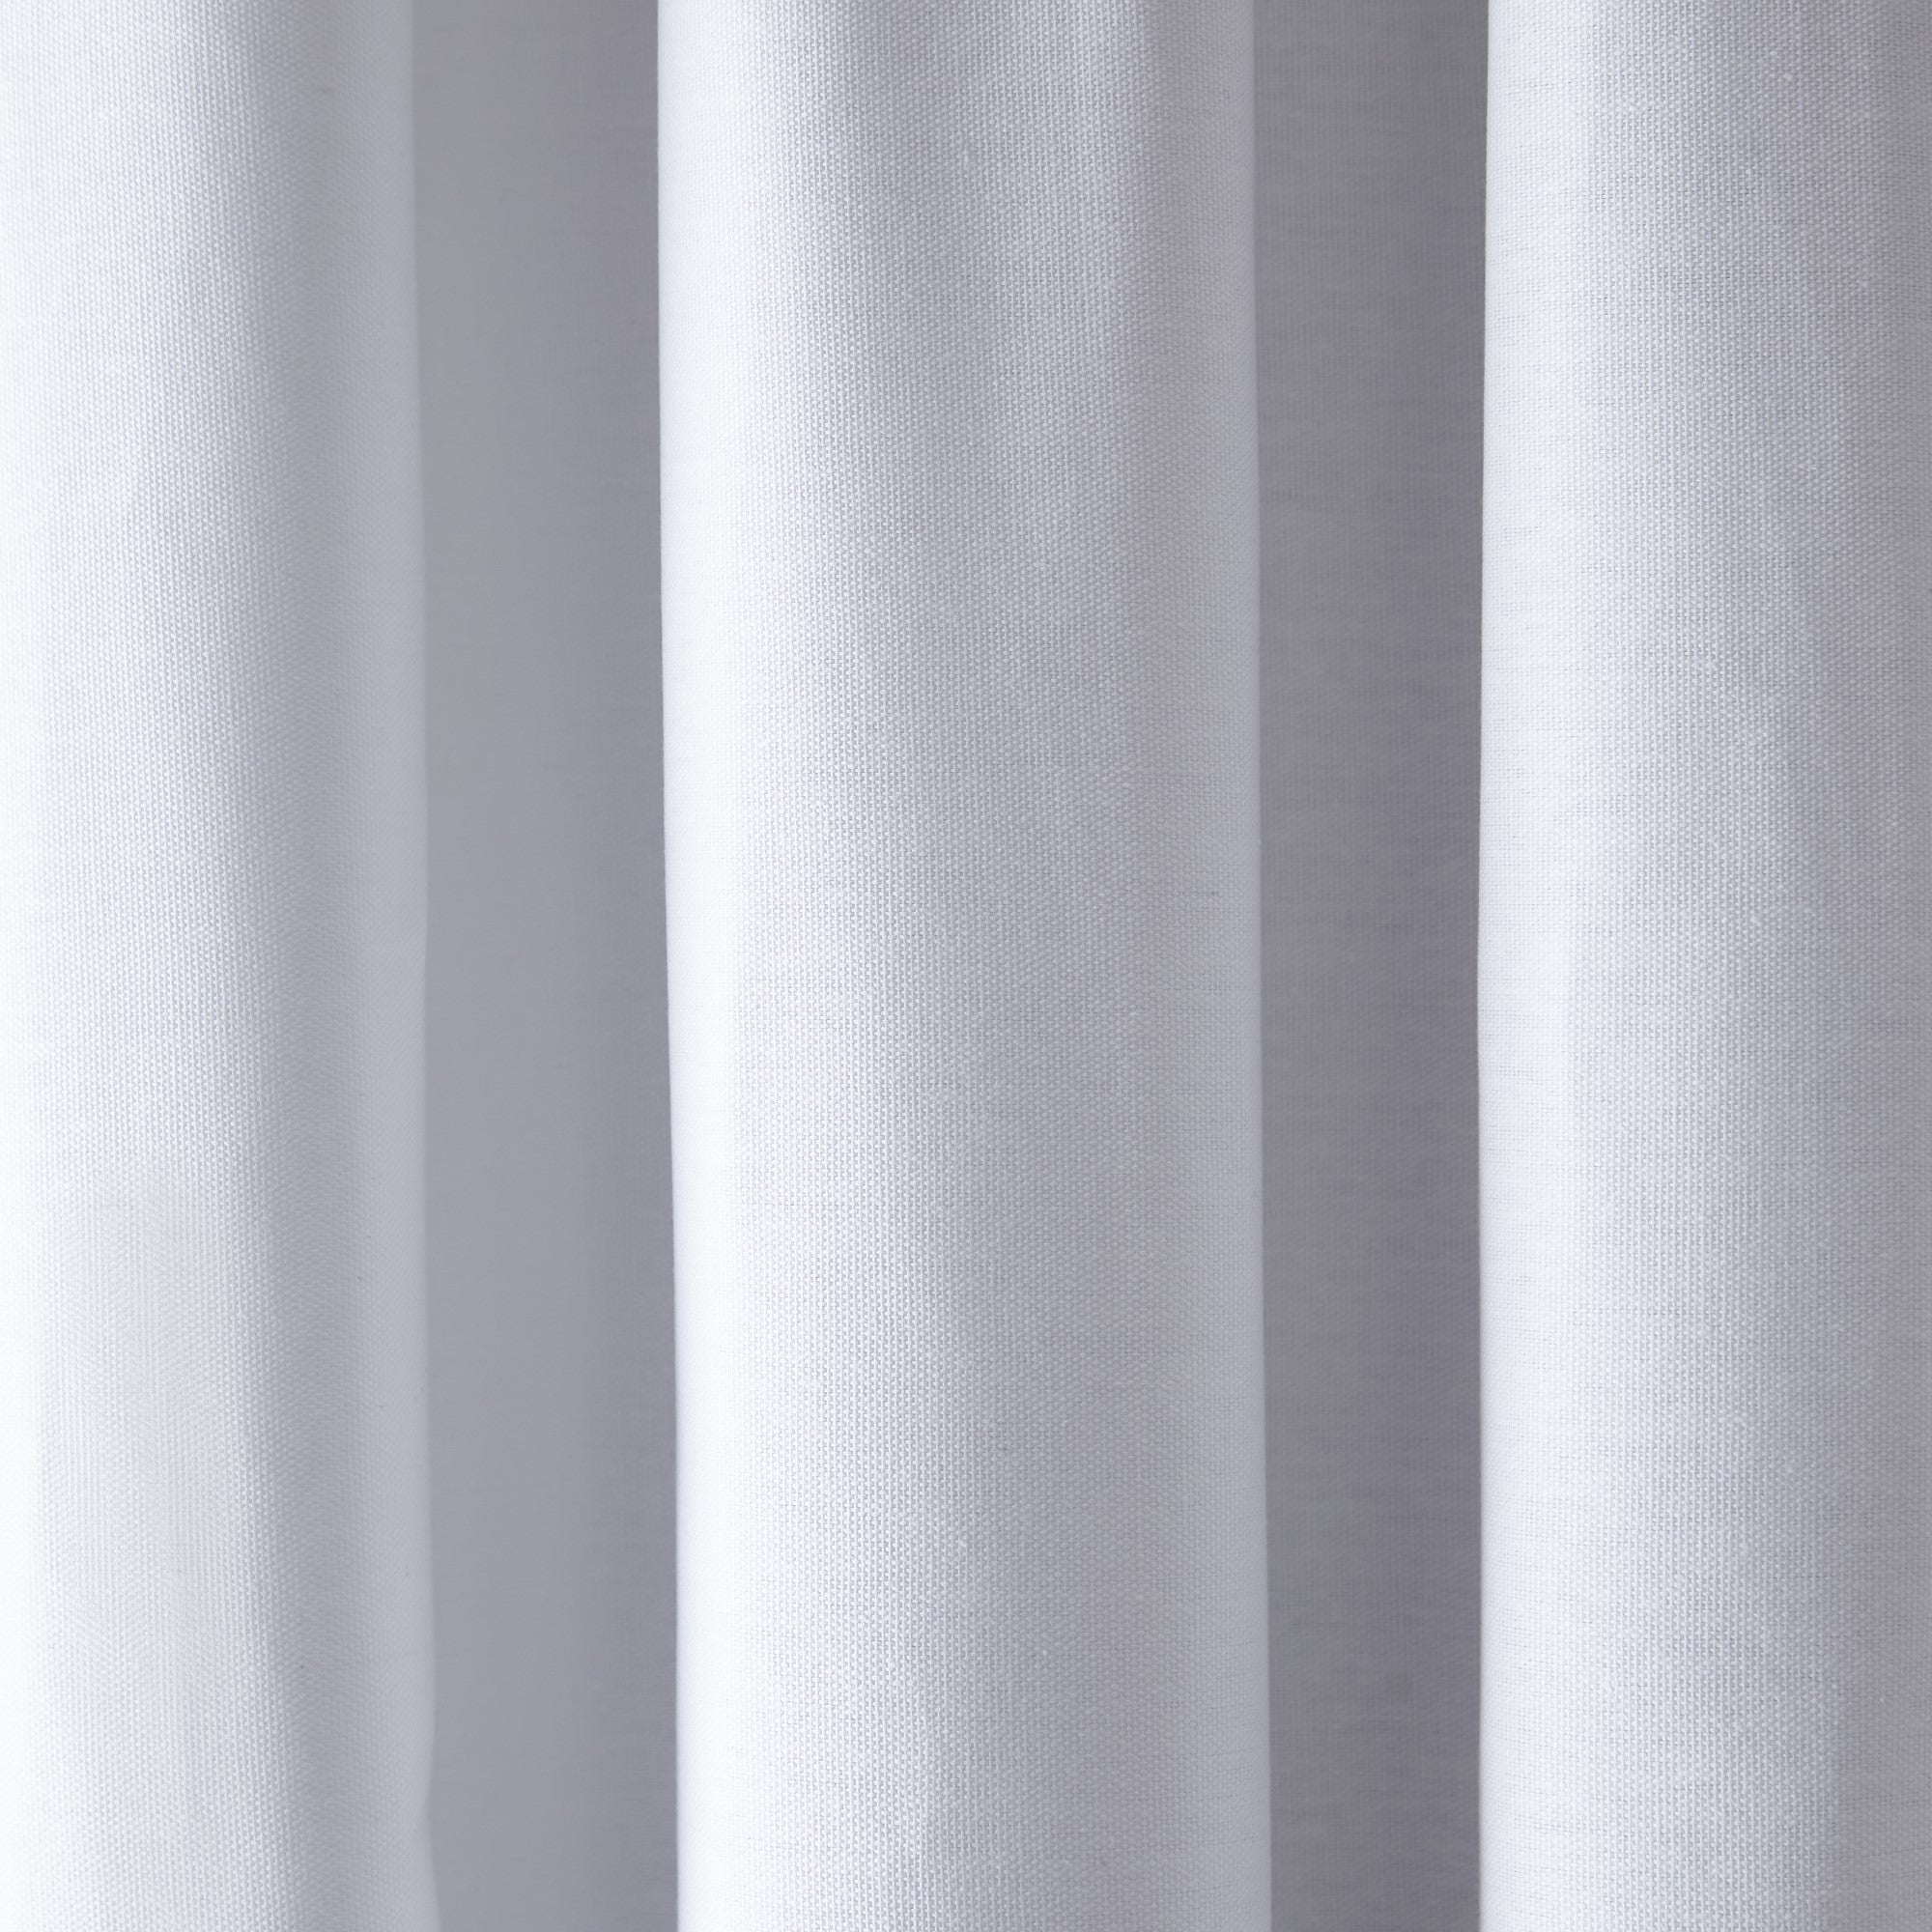 Pair of Pencil Pleat Curtains Dijon by Fusion in White